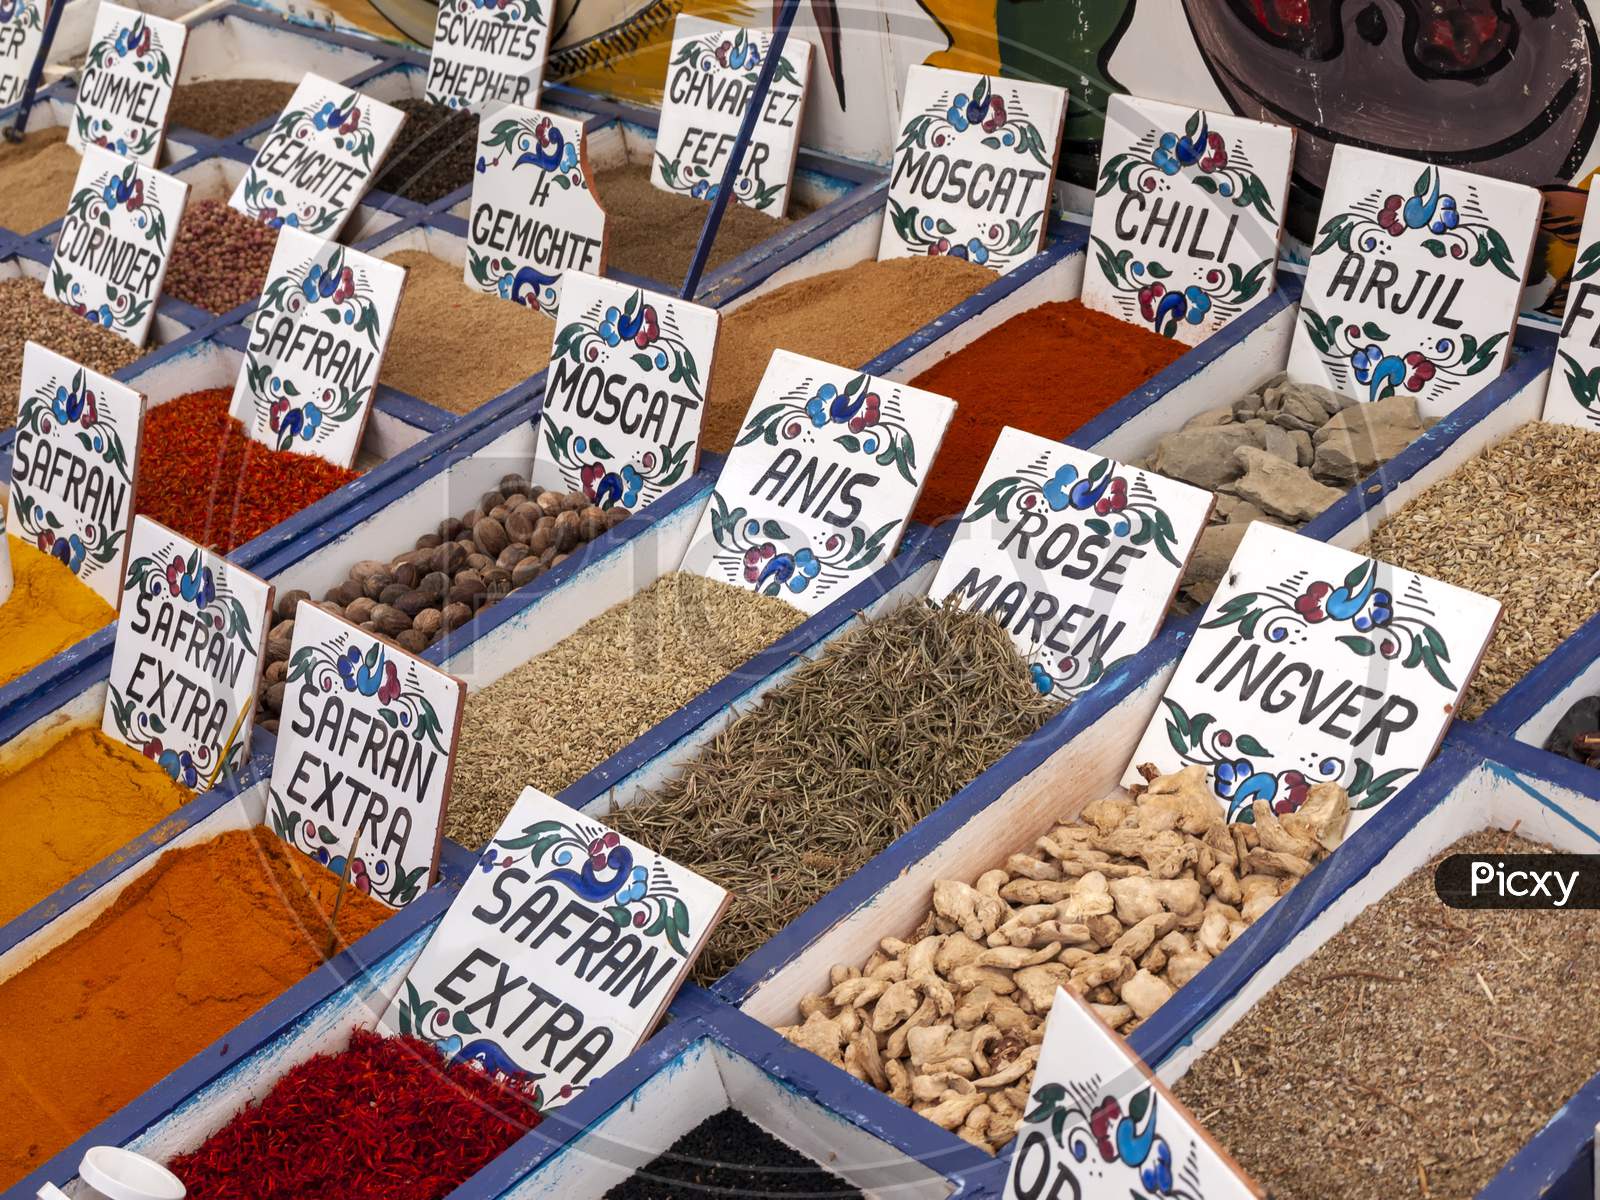 A large array of Oriental spices sold in an Arabian market.